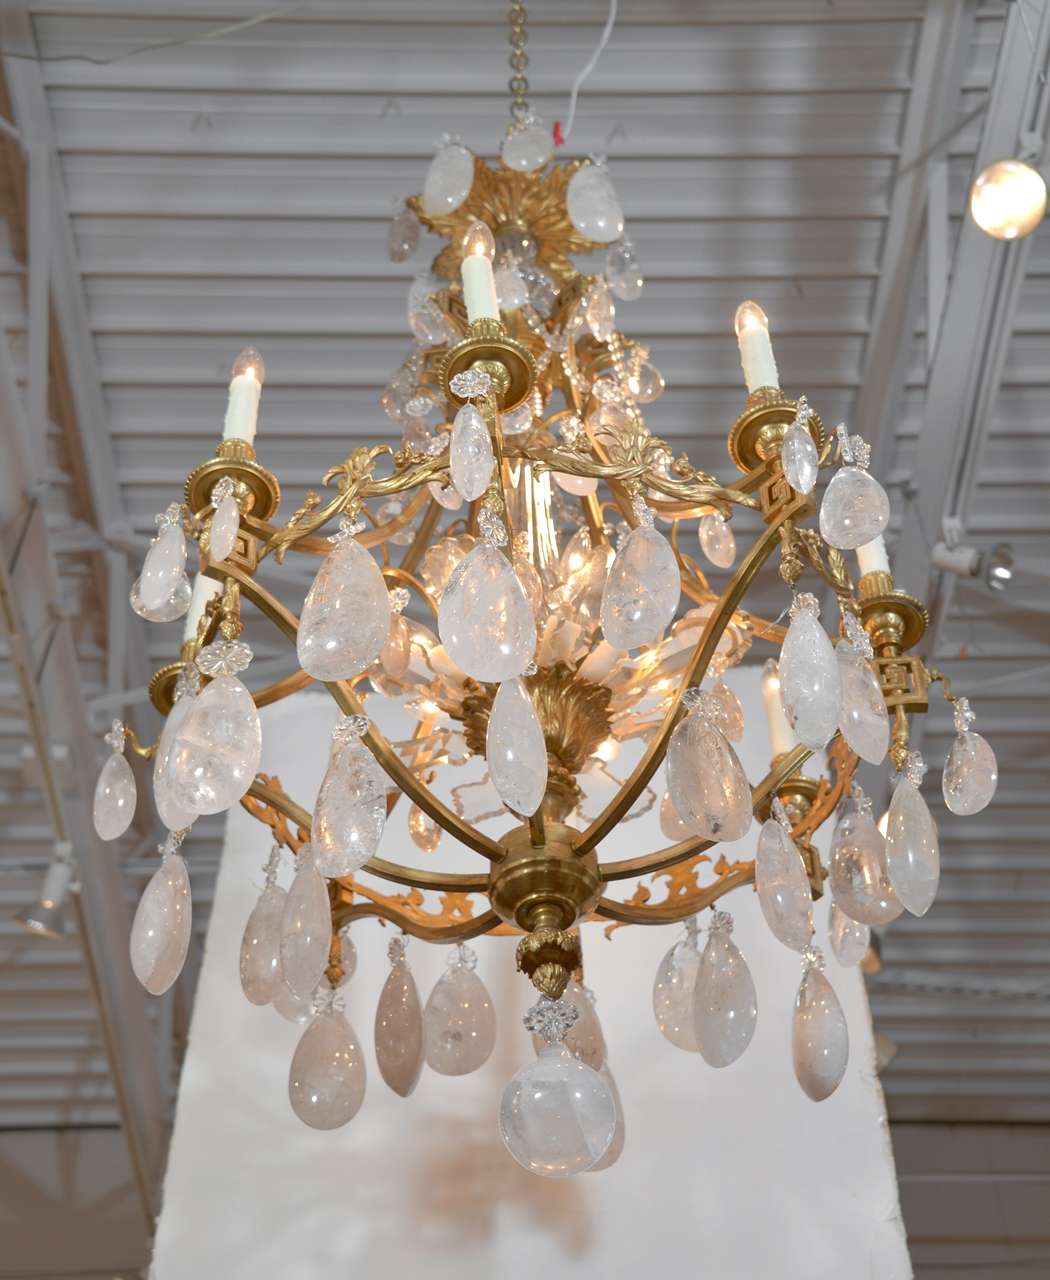 19th C Important Rock Crystal And Gilt Bronze Russian Chandelier For Sale 4